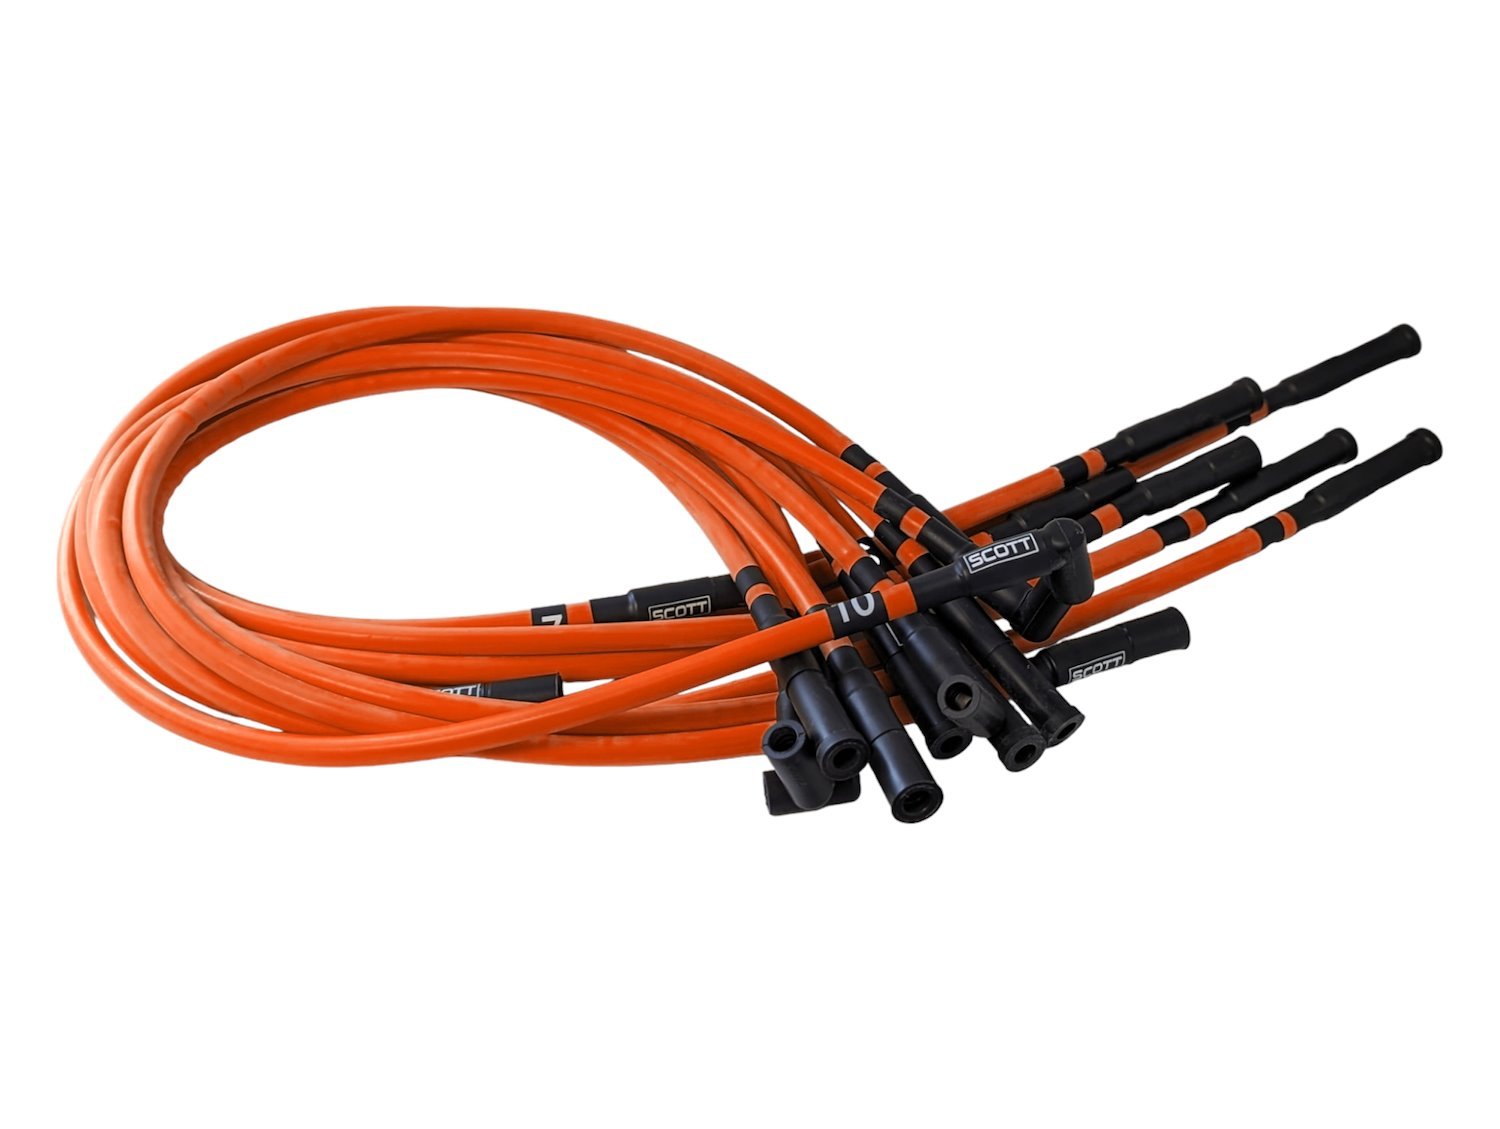 SPW-CH-690-I-9 High-Performance Silicone-Sleeved Spark Plug Wire Set for Dodge Viper (Gen-1) [Fluorescent Orange]